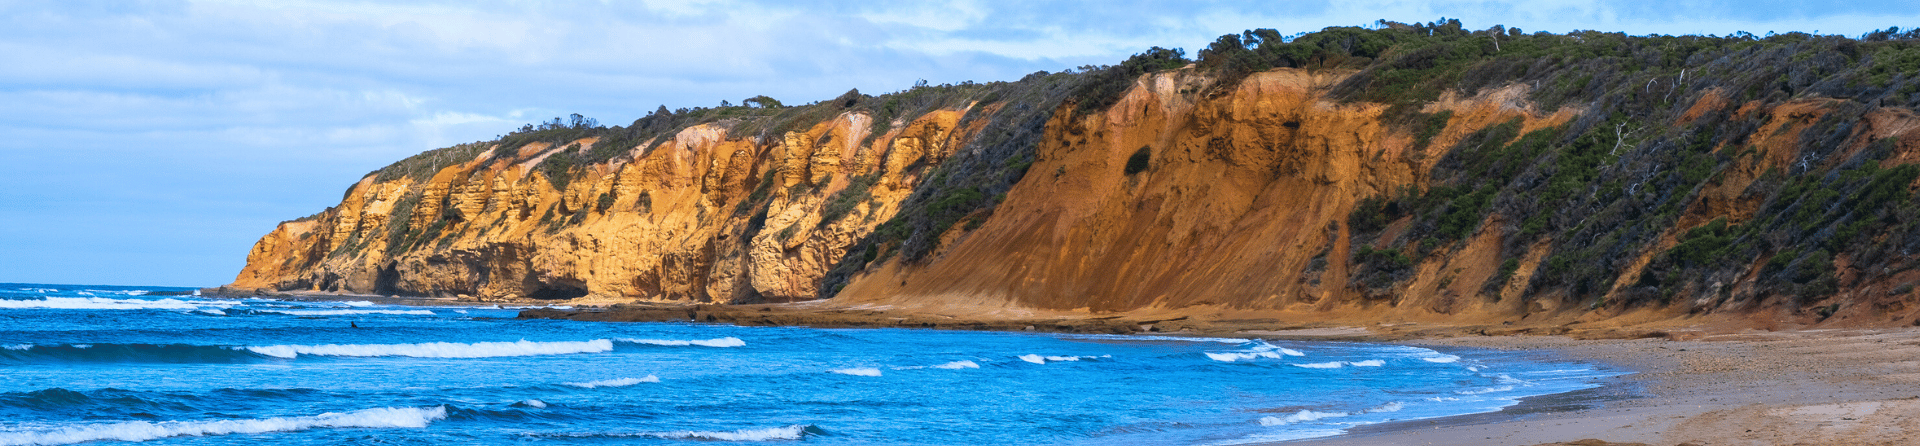 Visiting the Great Ocean Road in Winter: What to Expect